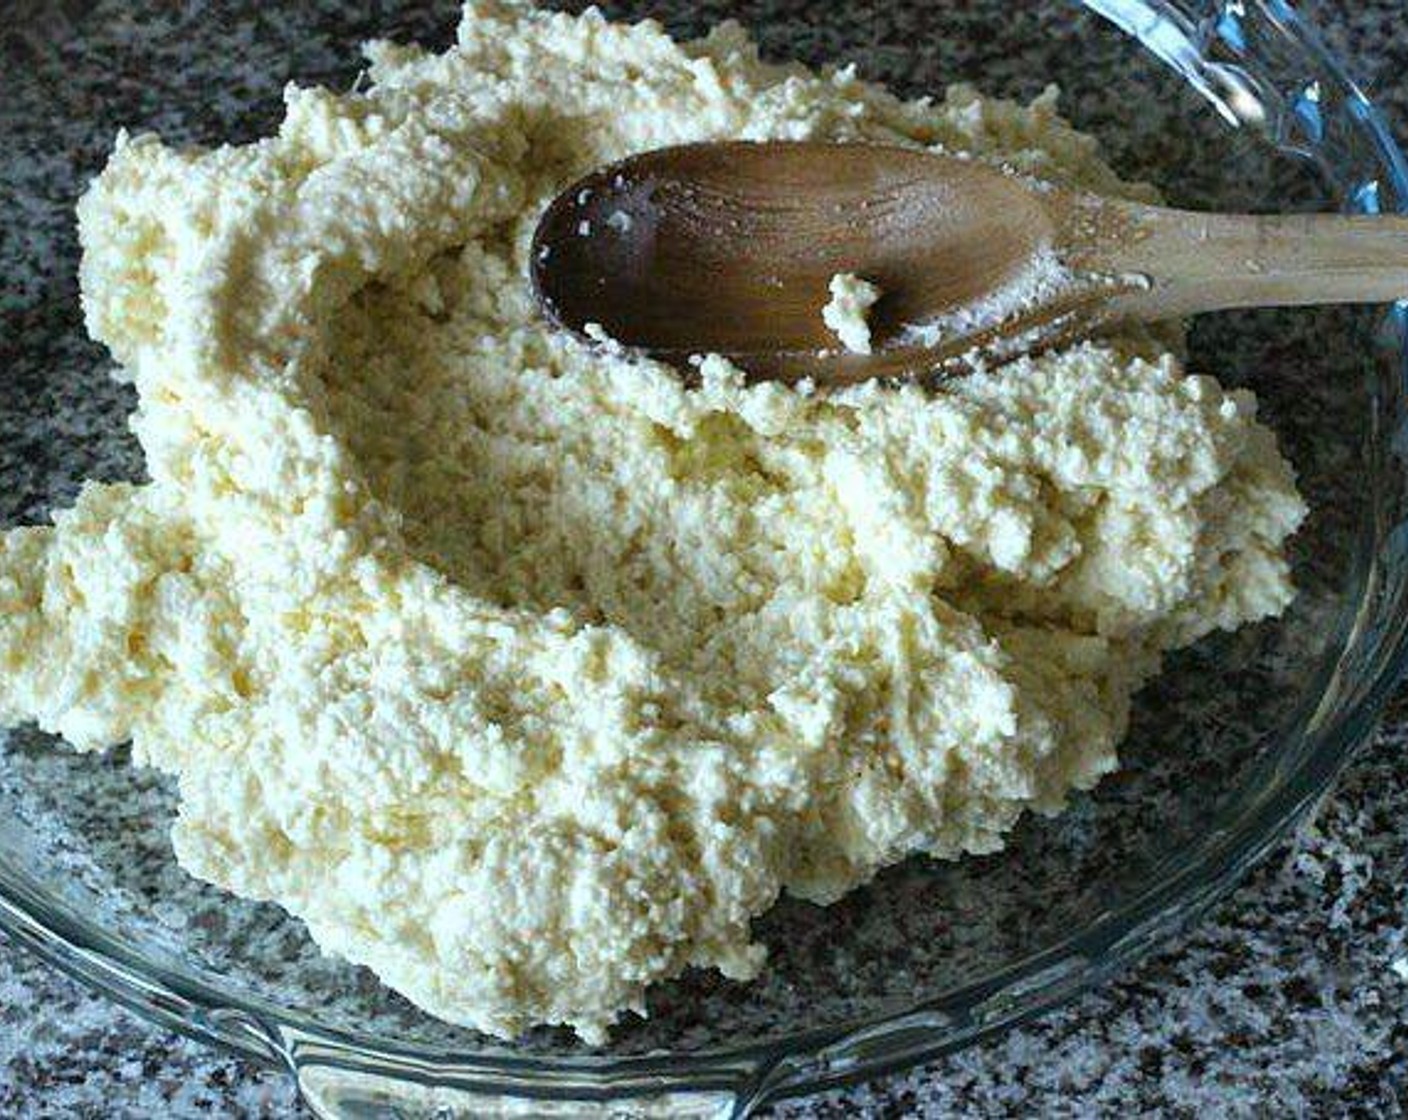 step 4 In a bowl, mix Ricotta Cheese (2 cups) with Eggs (2), Salt (1/2 tsp), Ground Black Pepper (1/2 tsp), and Parmesan Cheese (1/3 cup). Mix well with a hand beater or wooden spoon.